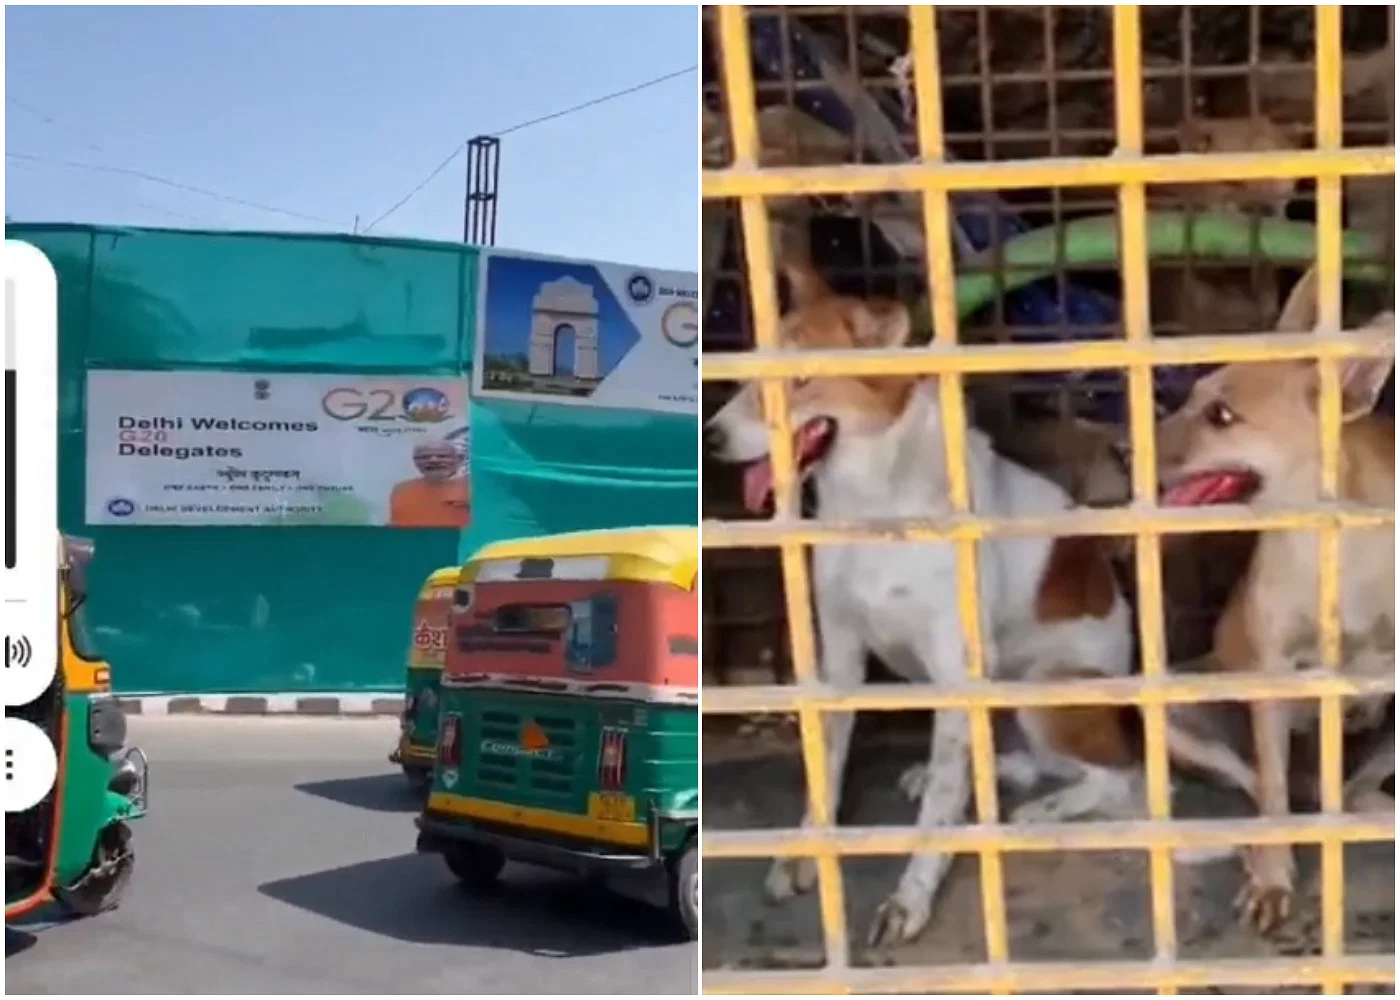 Stray Dogs Released Haphazardly in Delhi After G20 Summit